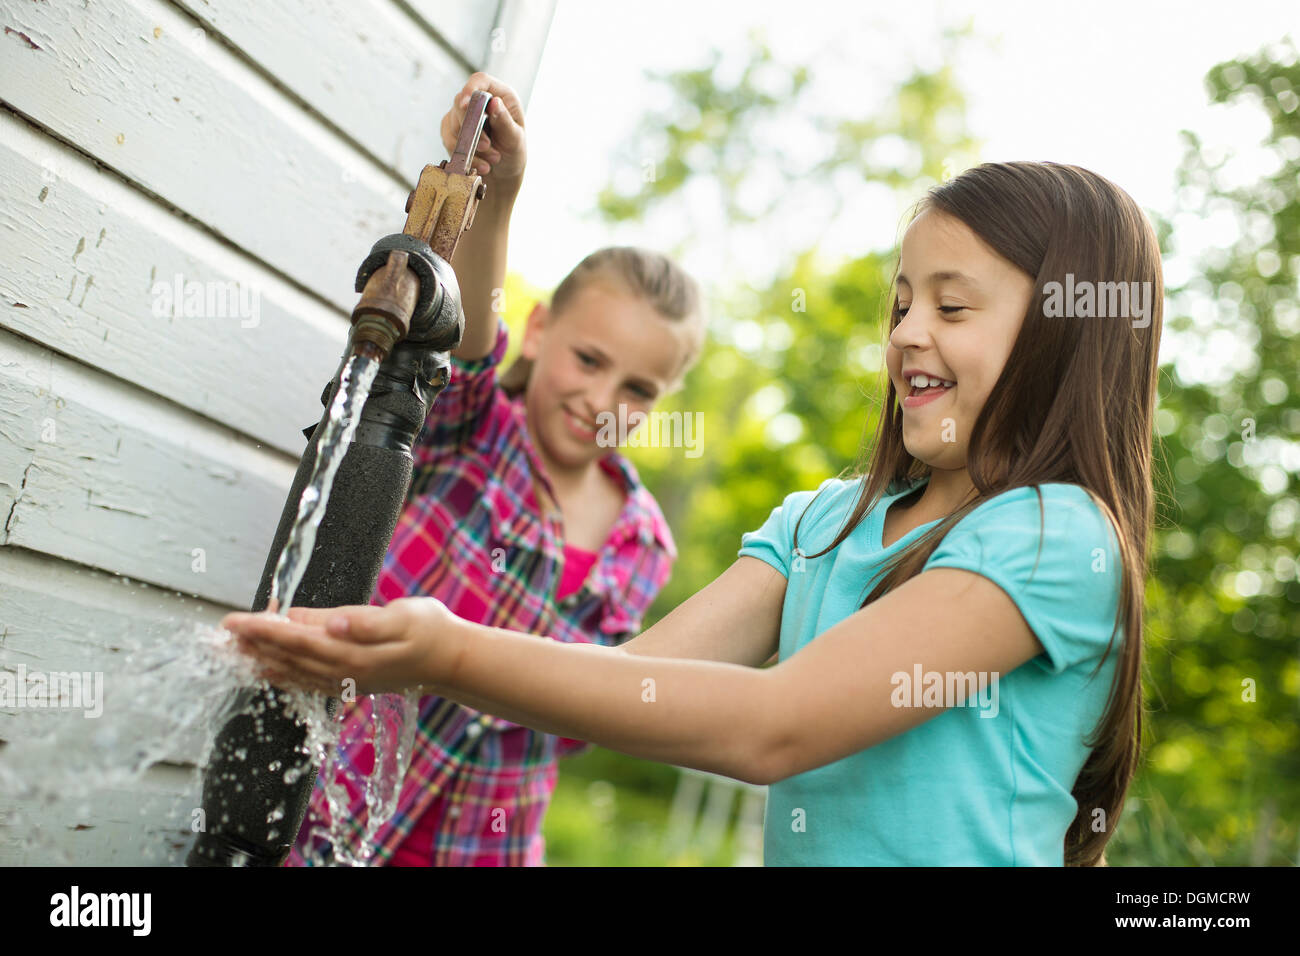 Organic farm. Two girls washing their hands under the flow of water from a pump in the yard. Stock Photo